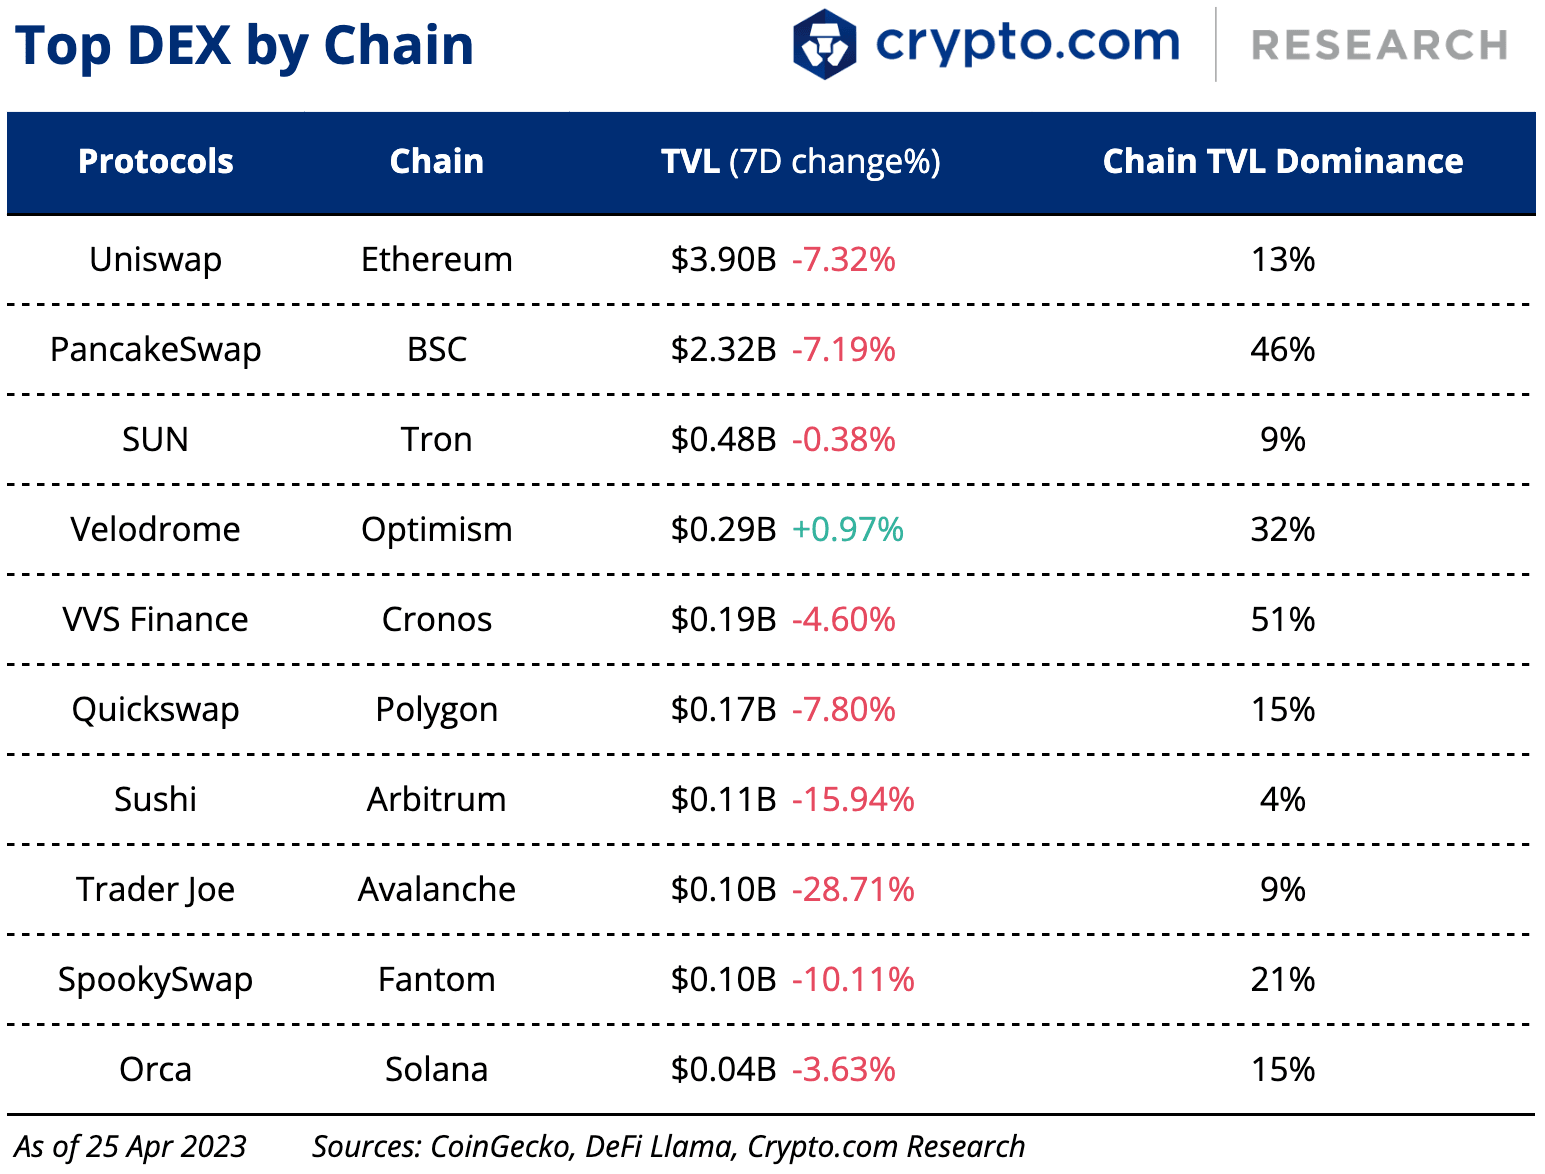 Top Dex By Chain 26 Apr